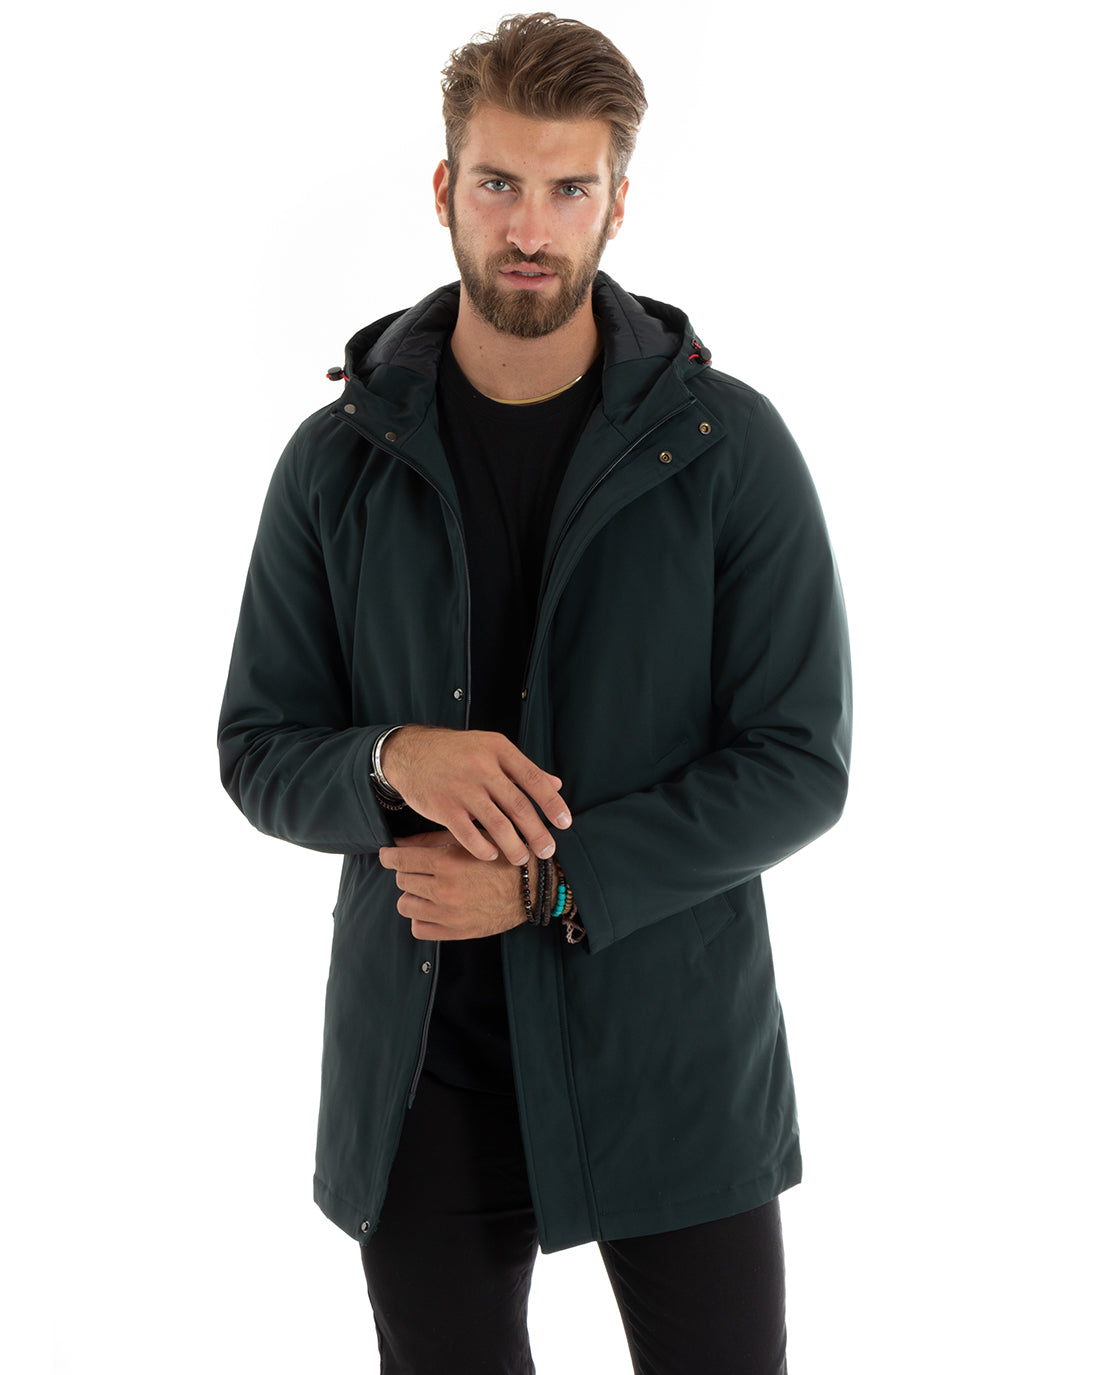 Men's Waterproof Trench Jacket Technical Fabric Long Padded Jacket With Hood Zipper Petrol GIOSAL-G3092A